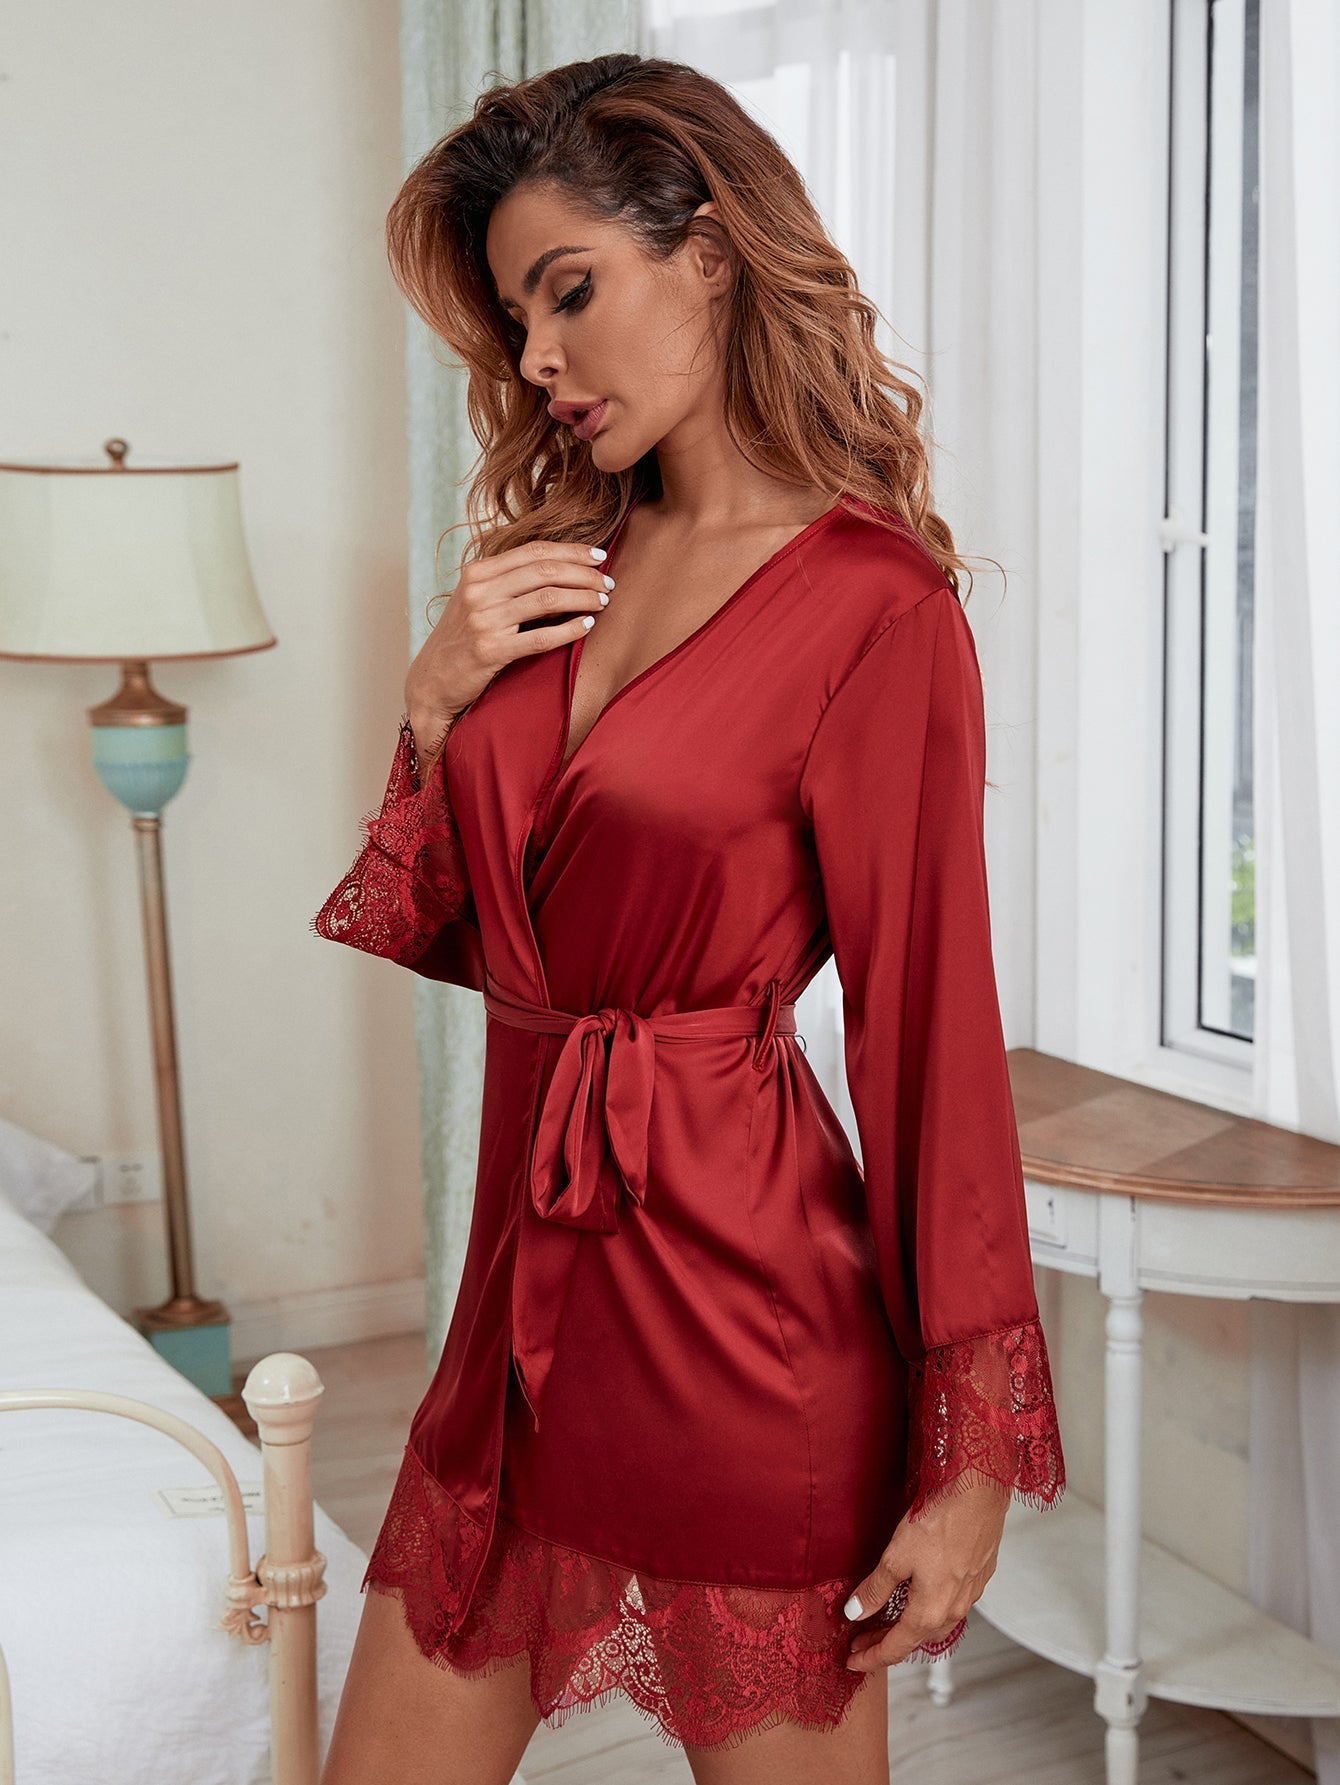 Sexy satin silky nightgown with waistband,long sleeve silky Pajamas Dress,Floral Lace Babydoll Dress, Women sexy Lingerie Sai Feel